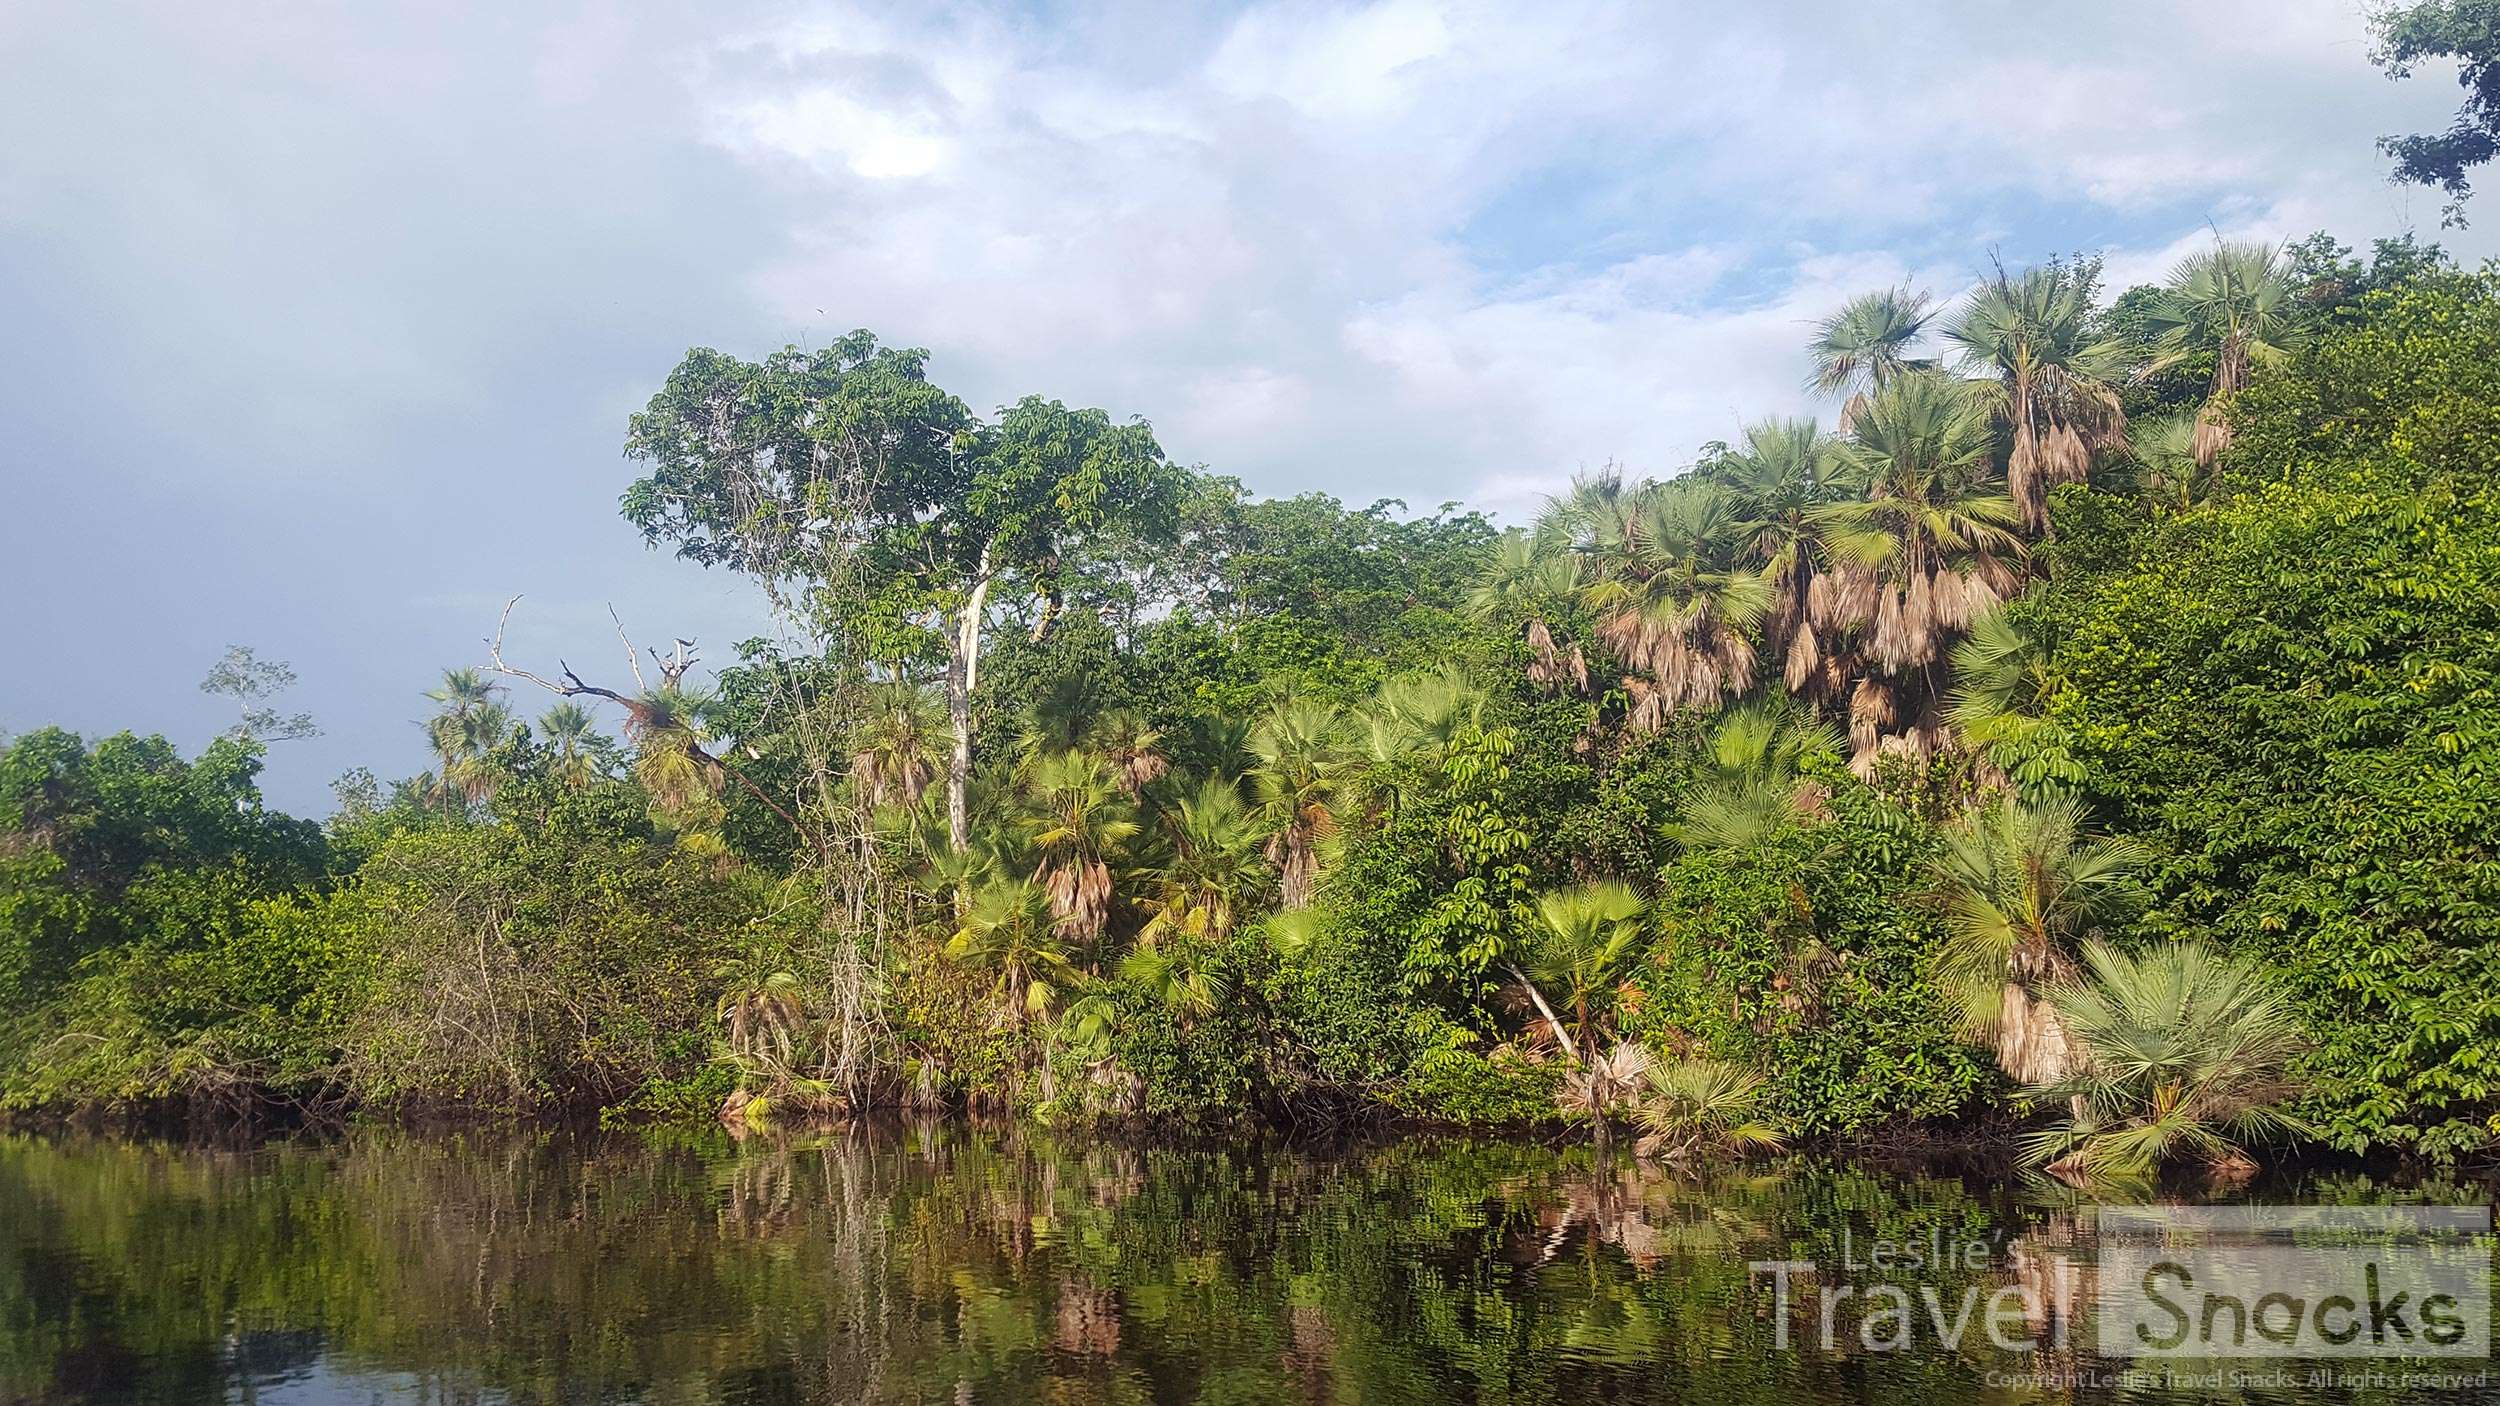 Rivers, jungles, caves. Tons of nature to explore in Belize.